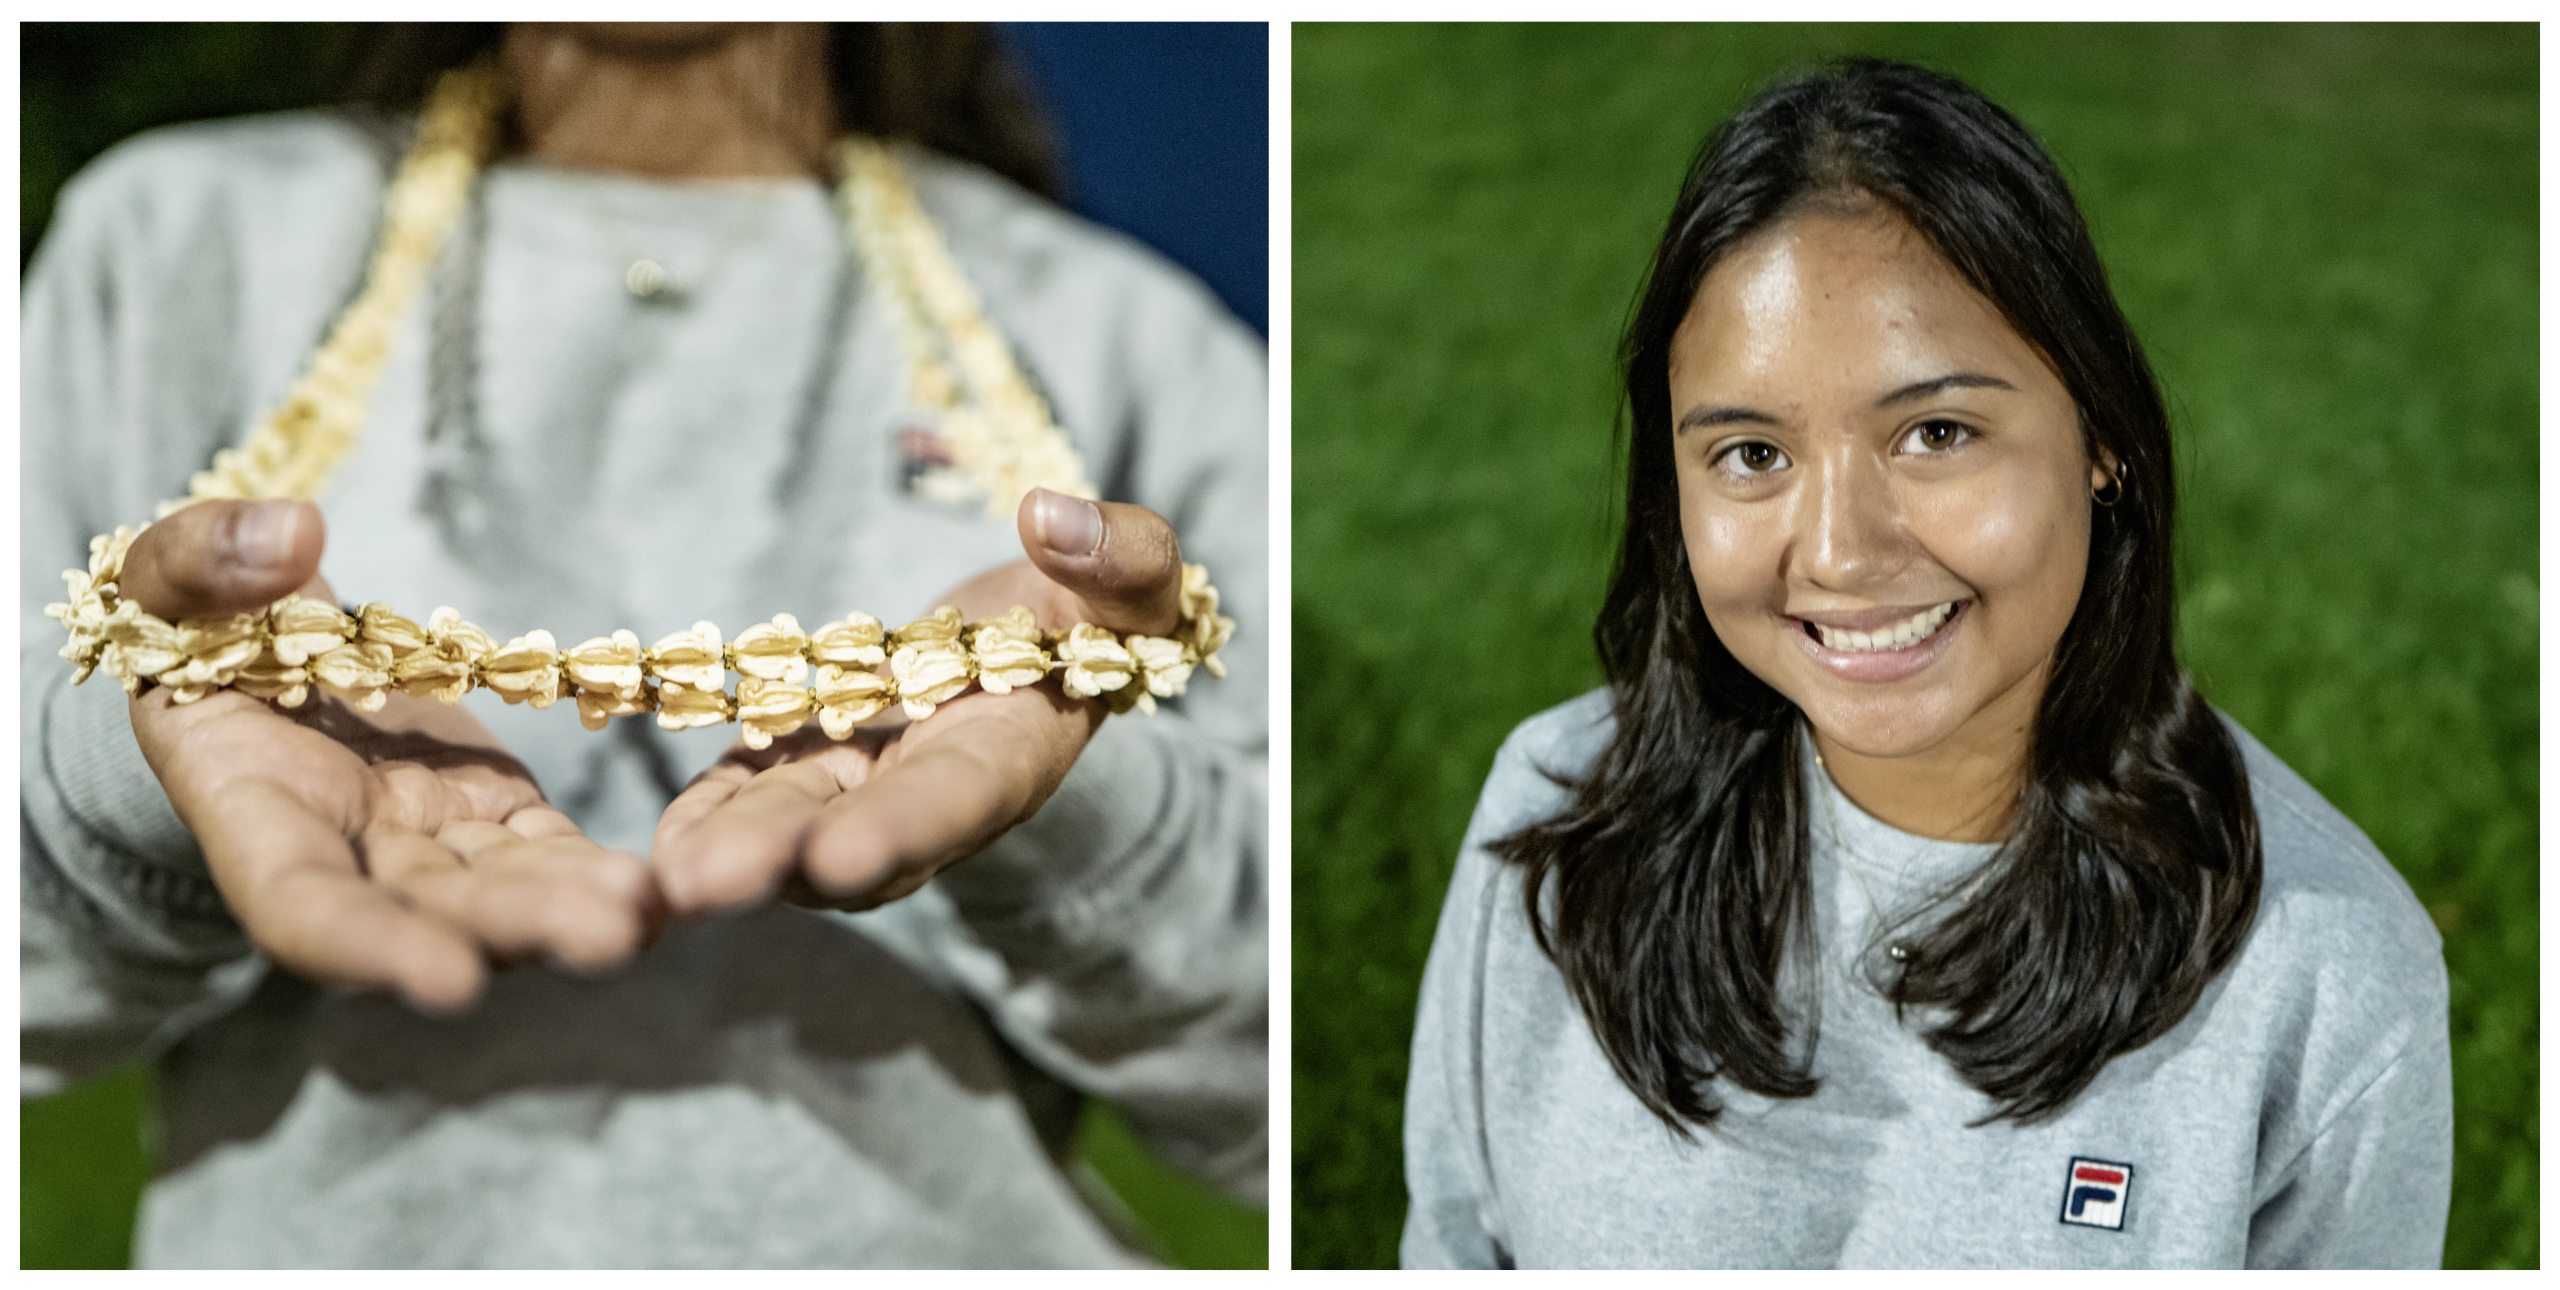 A two-photo collage of a student named Sophia Burgess. On the left is a picture of Sophia holding a crown flower lei, and on the right is a portrait of Sophia.